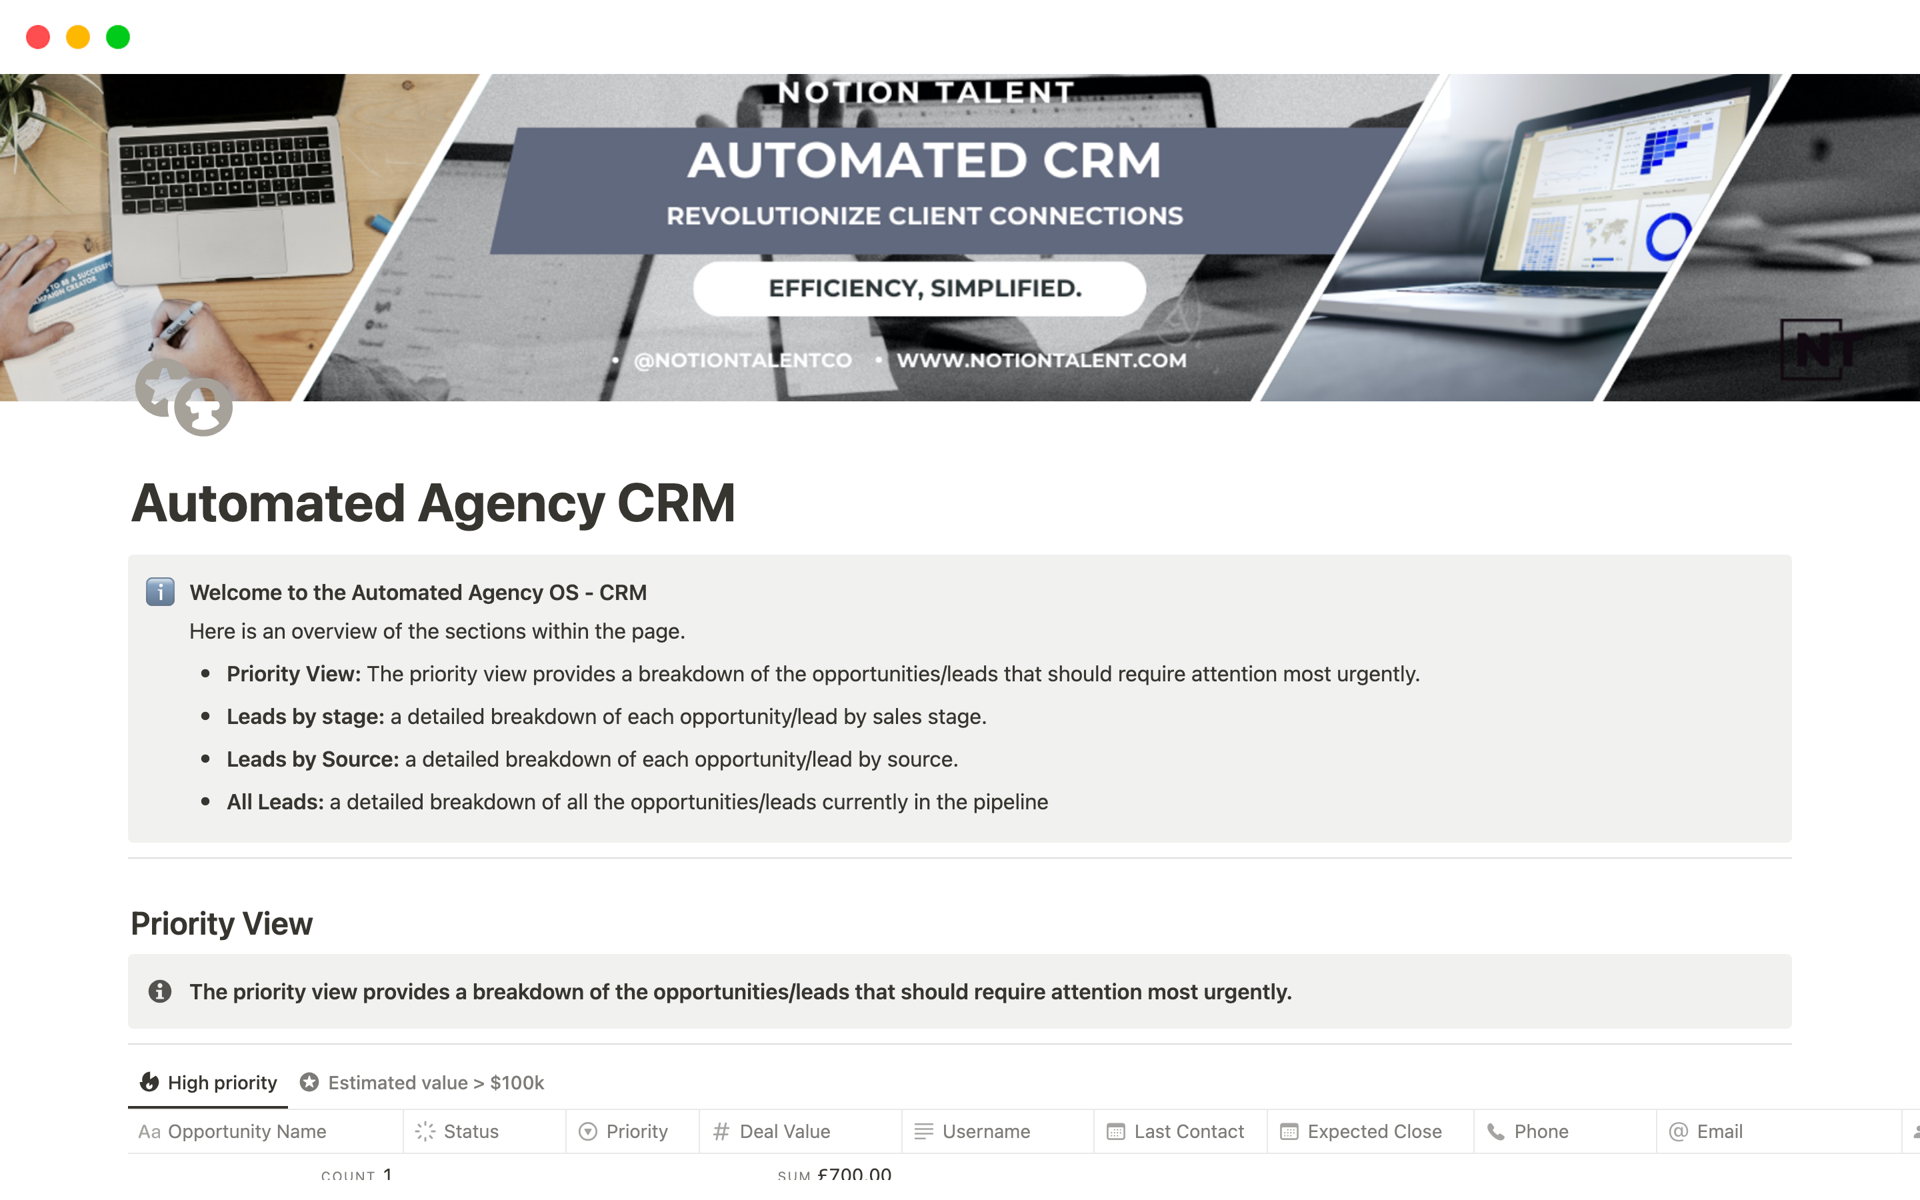 automated-agency-crm-shay-campbell-notion-talent-co-desktop